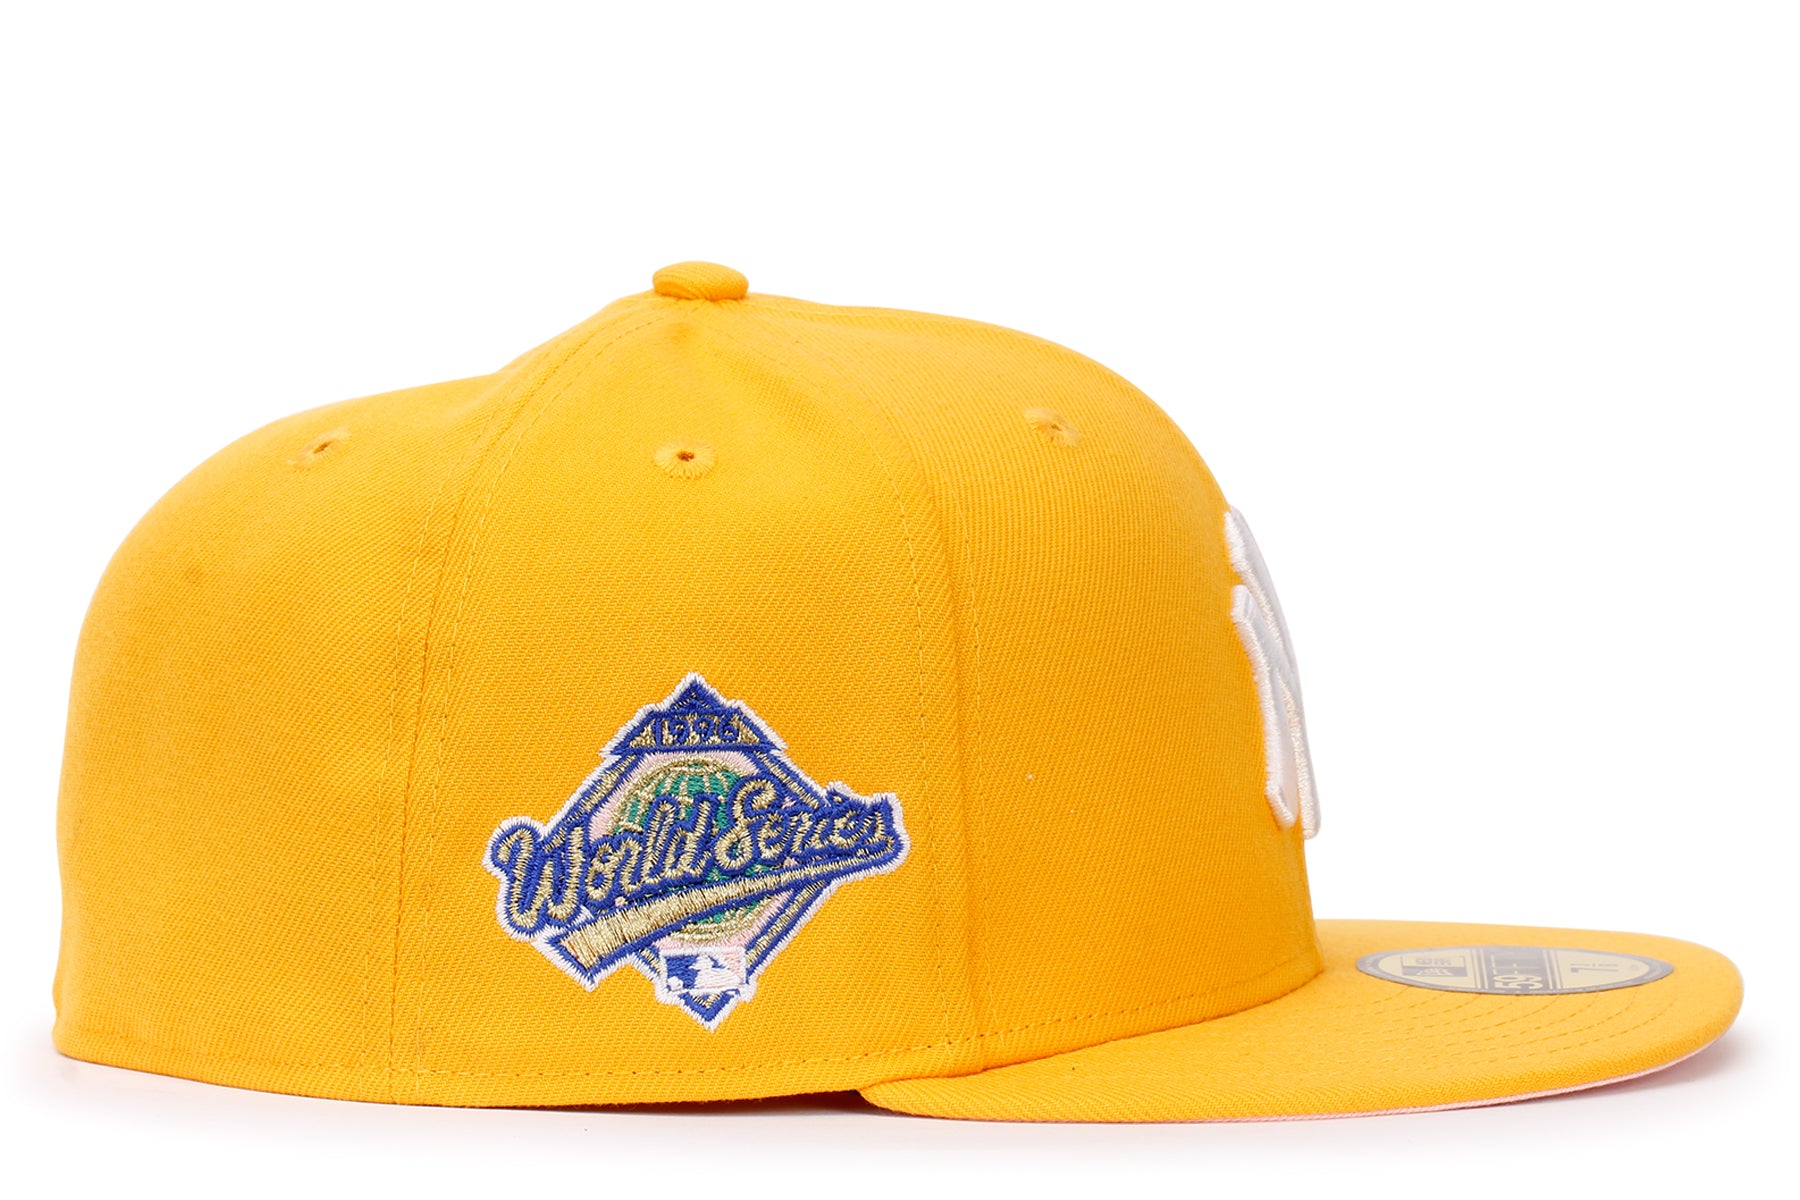 New Era 96 New York Yankees Fitted Cap in Yellow Size 712 | Jimmy Jazz